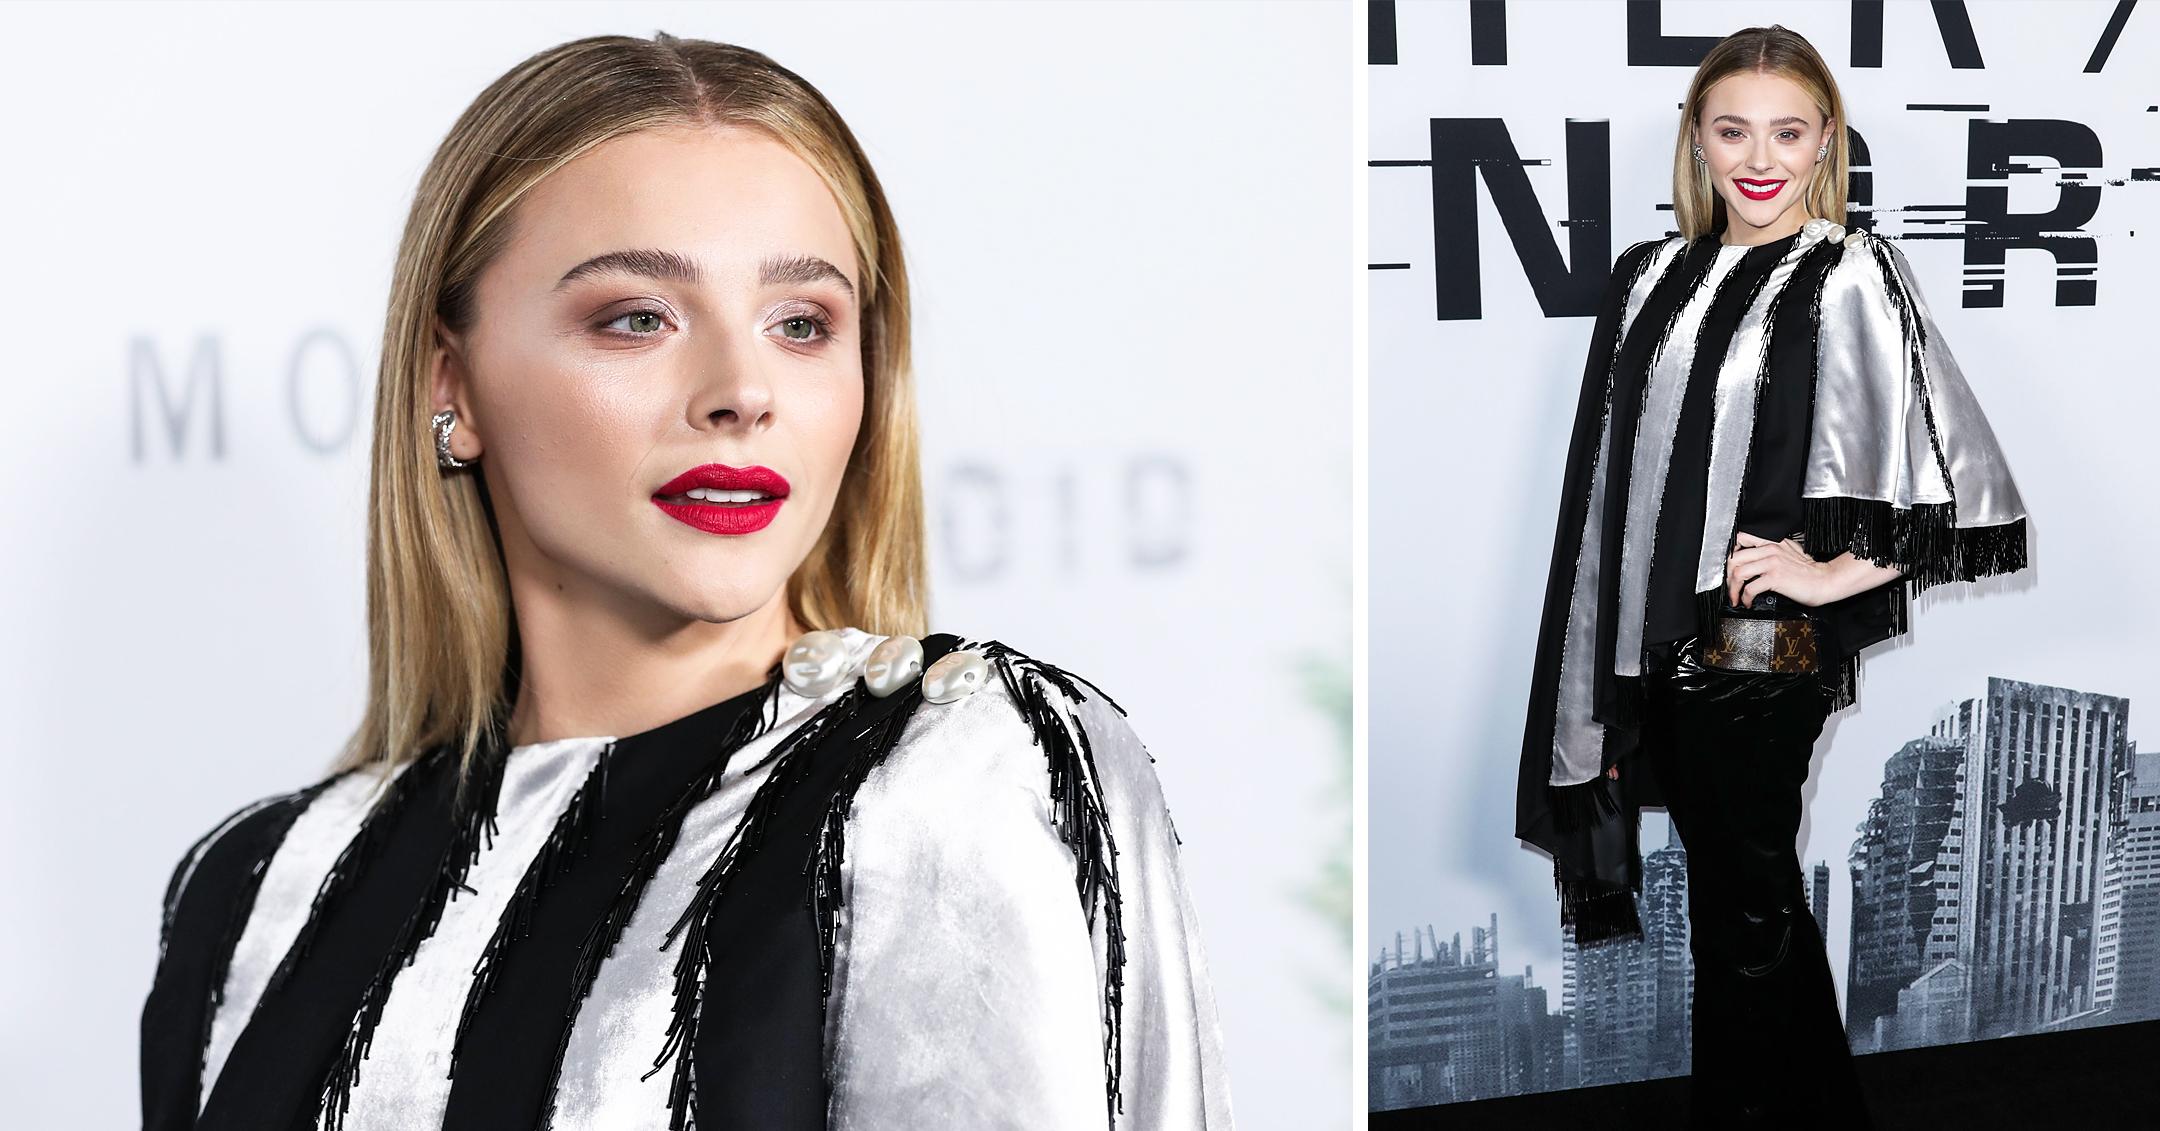 Chloe Grace Moretz Dons Striped Top To 'Mother/Android' Debut: Photos